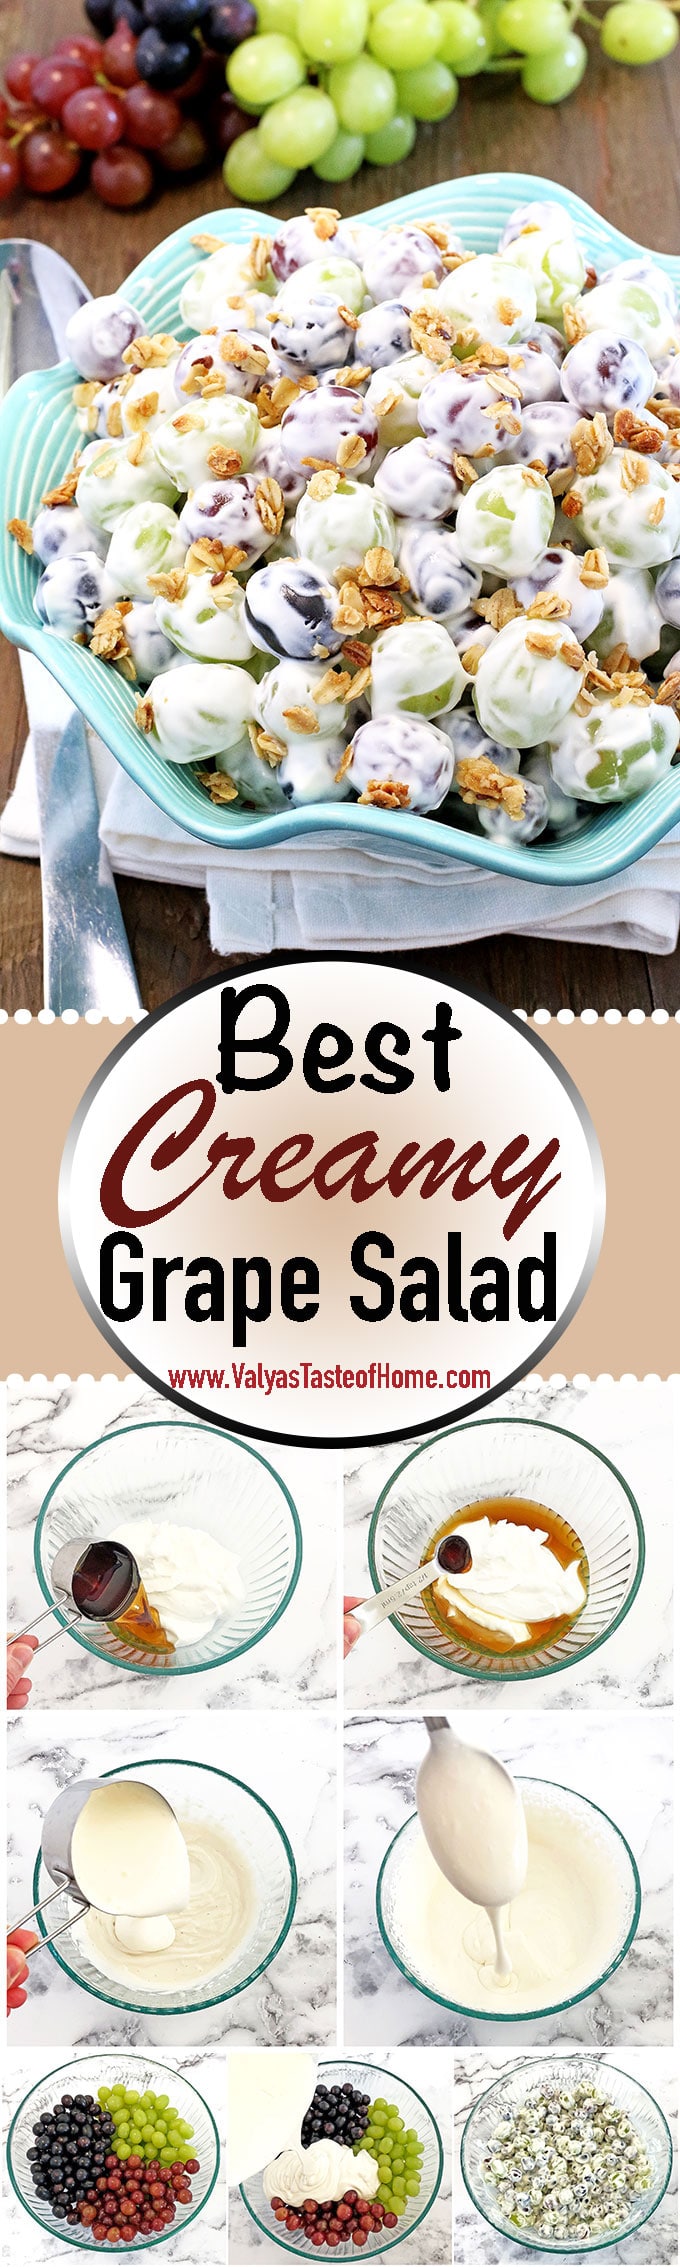 This Best Creamy Grape Salad is a delicious blend of fresh juicy grapes in a creamy vanilla yogurt dressing, and a touch of sweet and sour is a perfect way to sweeten up a picnic, backyard family gathering or any summer occasion. #fruitsalad #grapesalad #valyastasteofhome #bestcreamygrapesalad